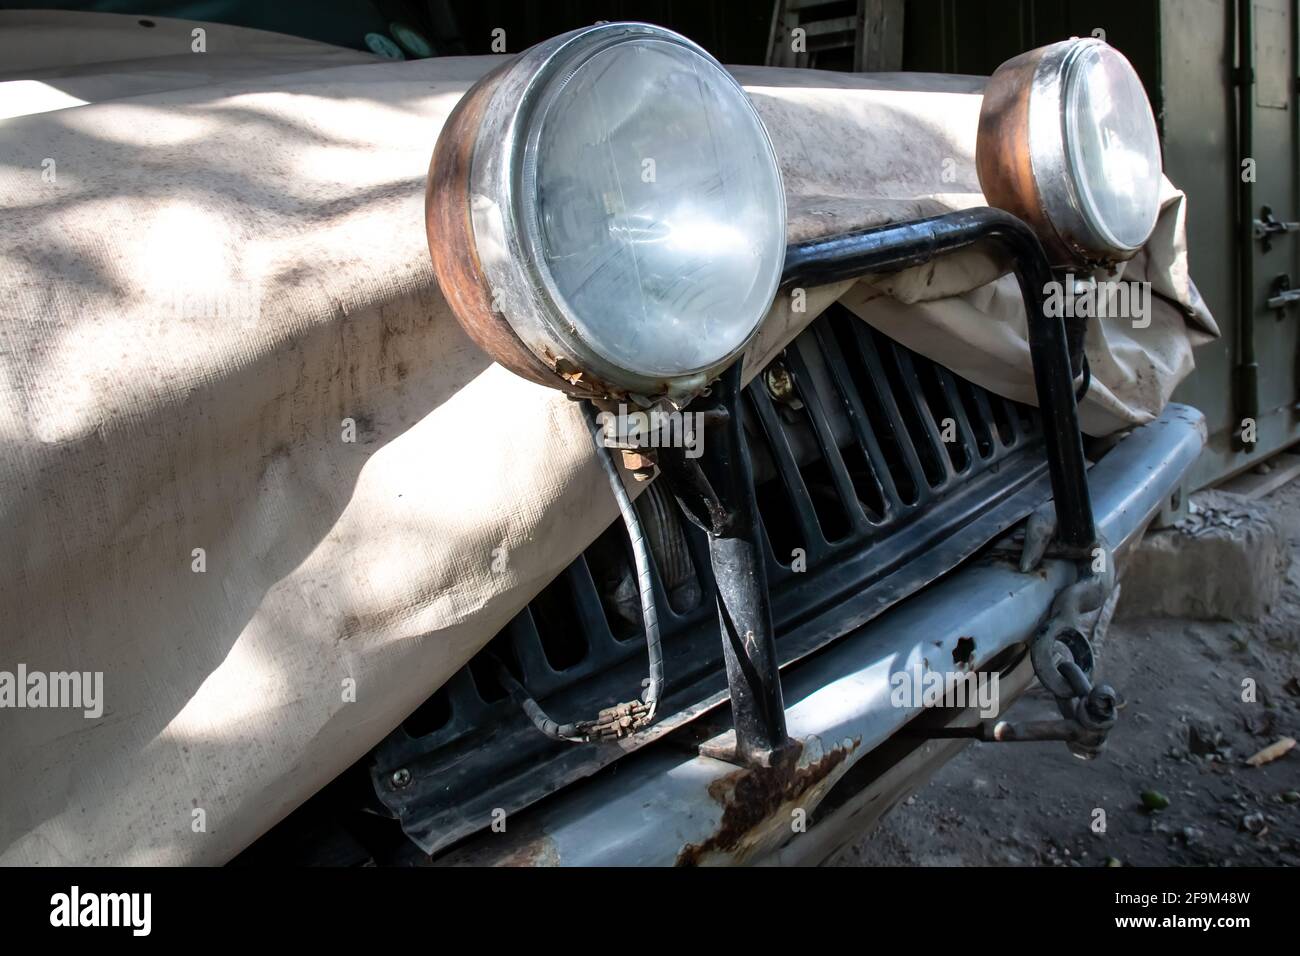 An old-fashioned off-roading vehicle covered with a beige tarpaulin canvas cover and external halogen head light bulbs on a light bar bumper. Stock Photo